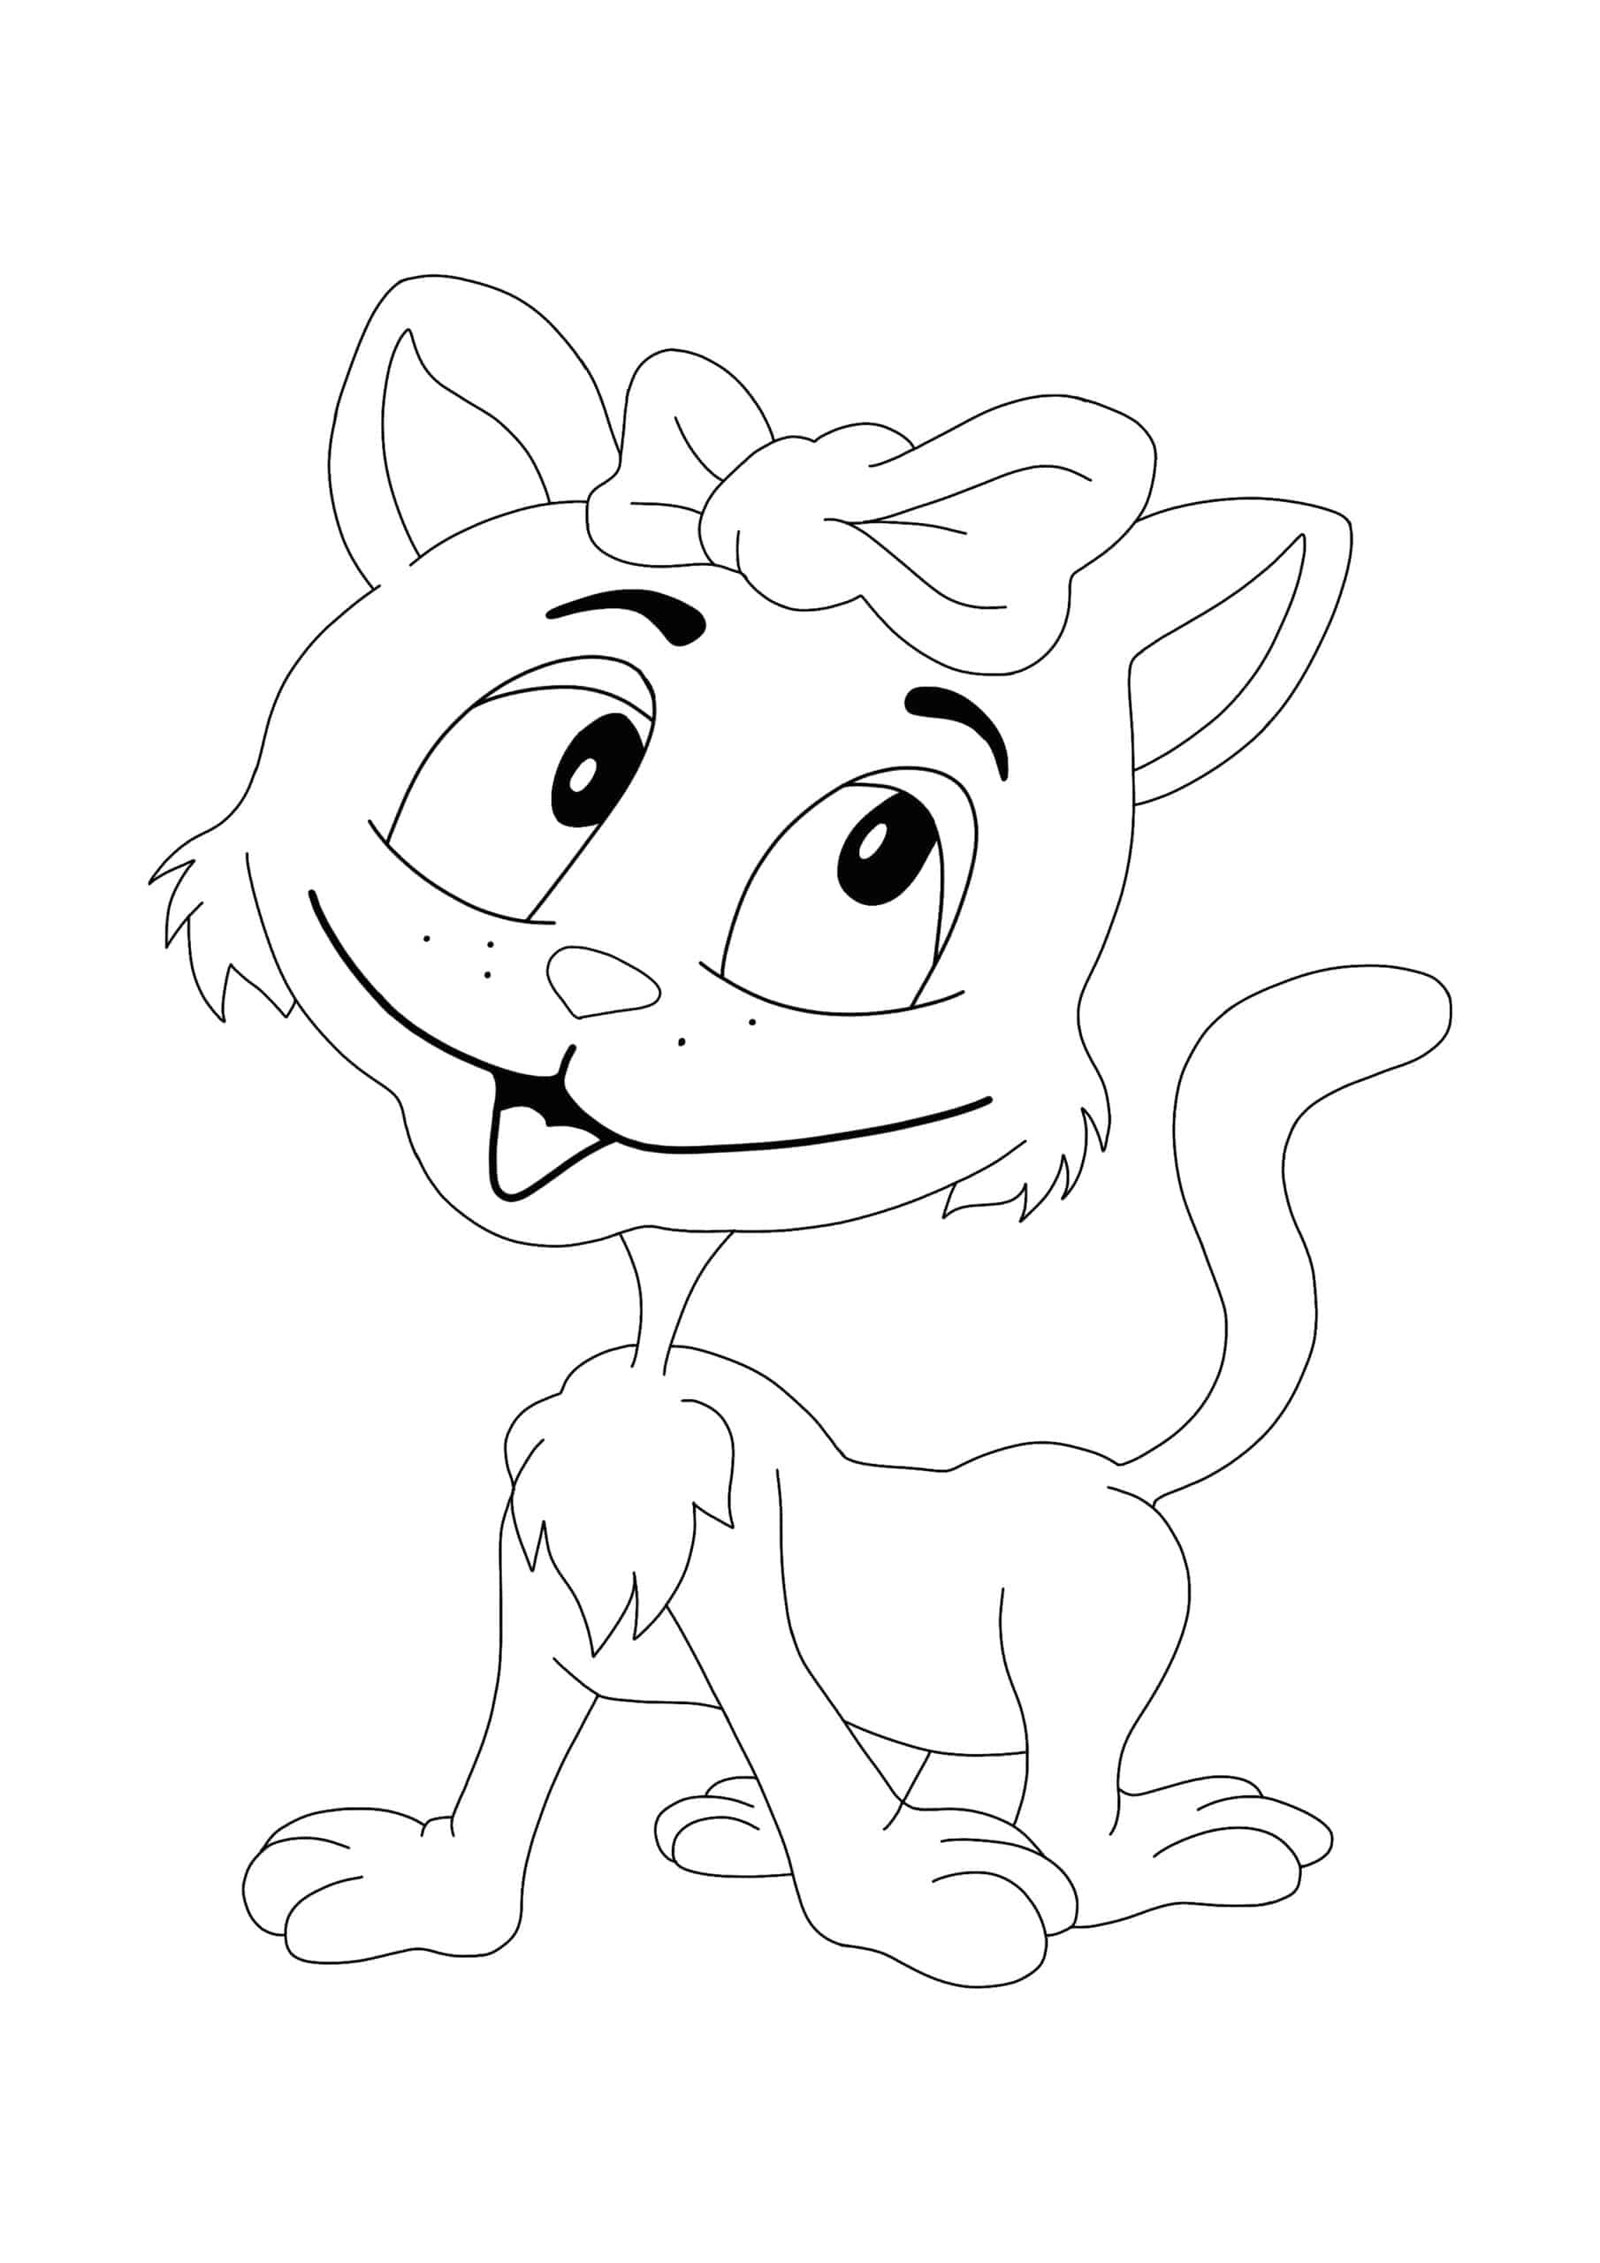 Kitty Cat coloring page